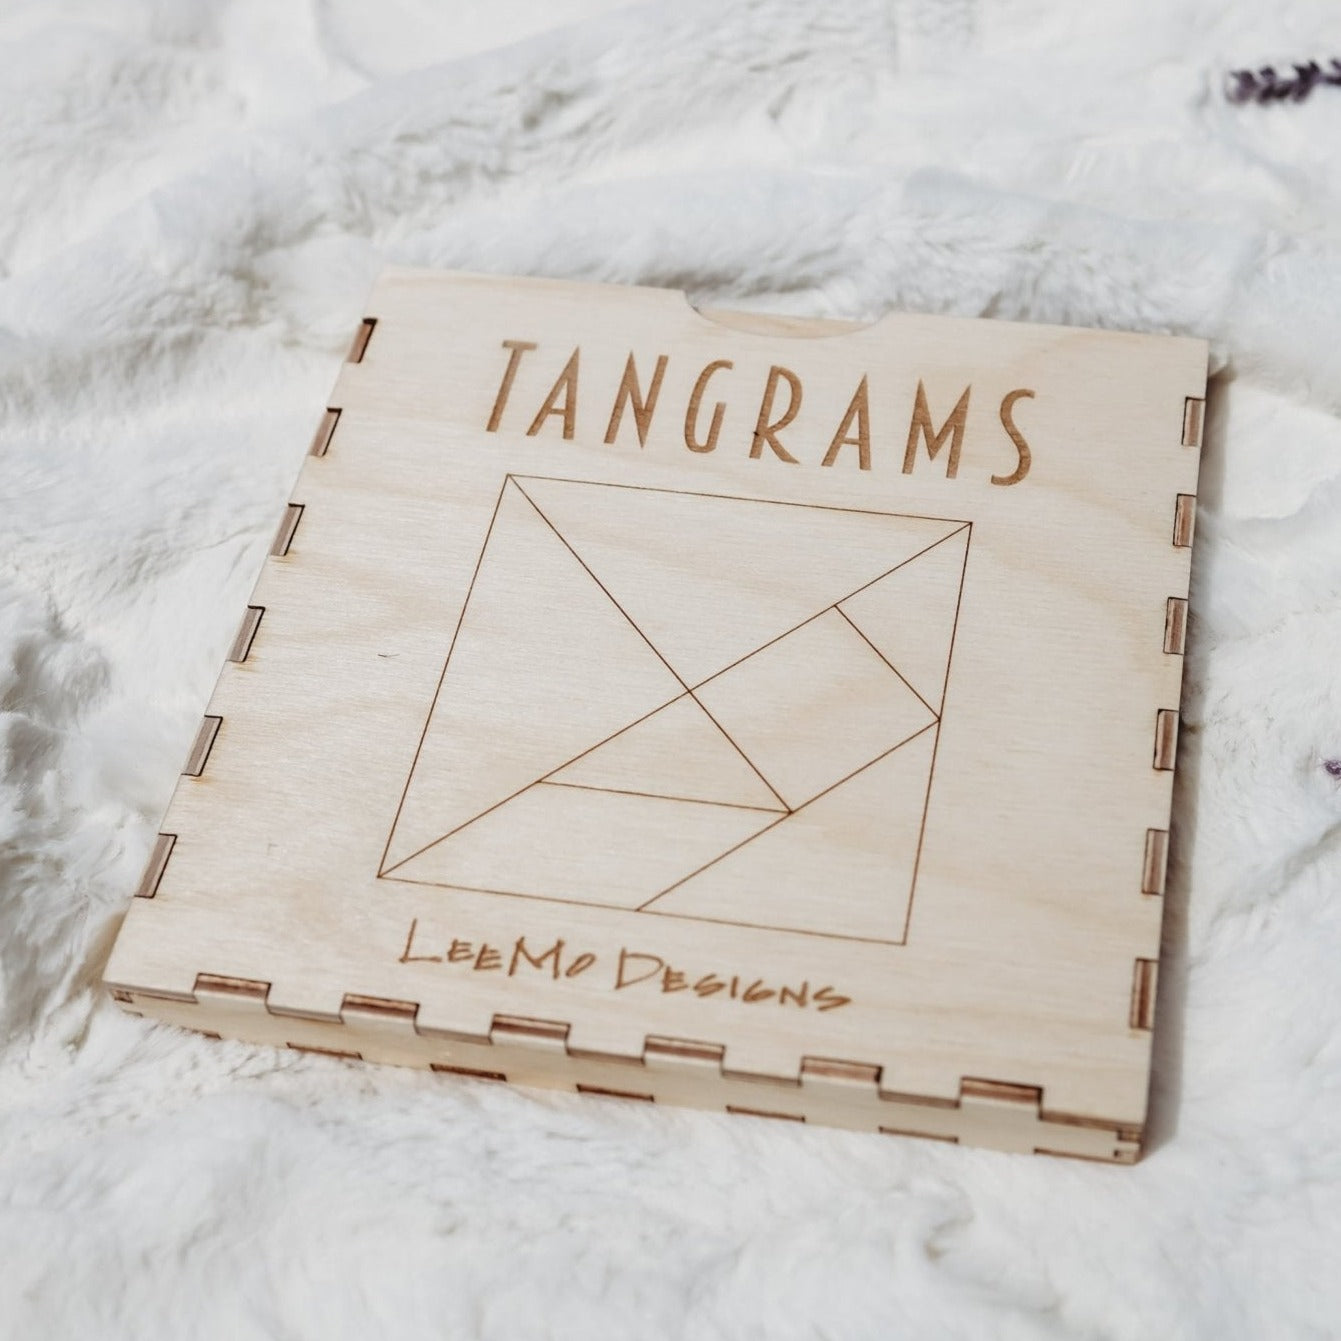 Tangrams Puzzles - laser cut and engraved wood - by LeeMo Designs in Bend, Oregon